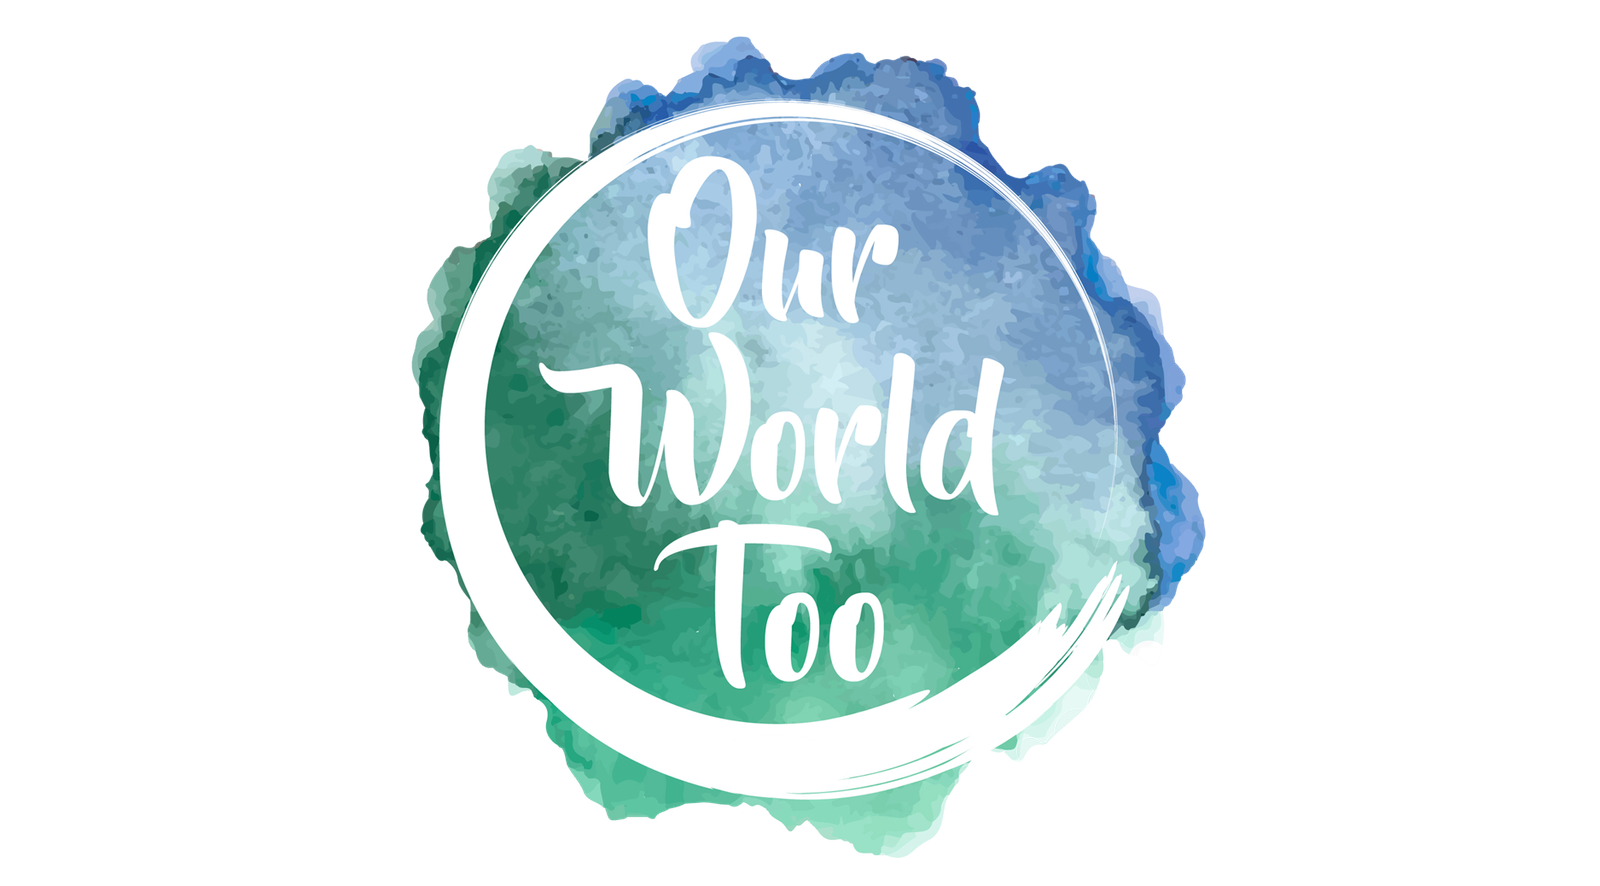 Our World Too Logo